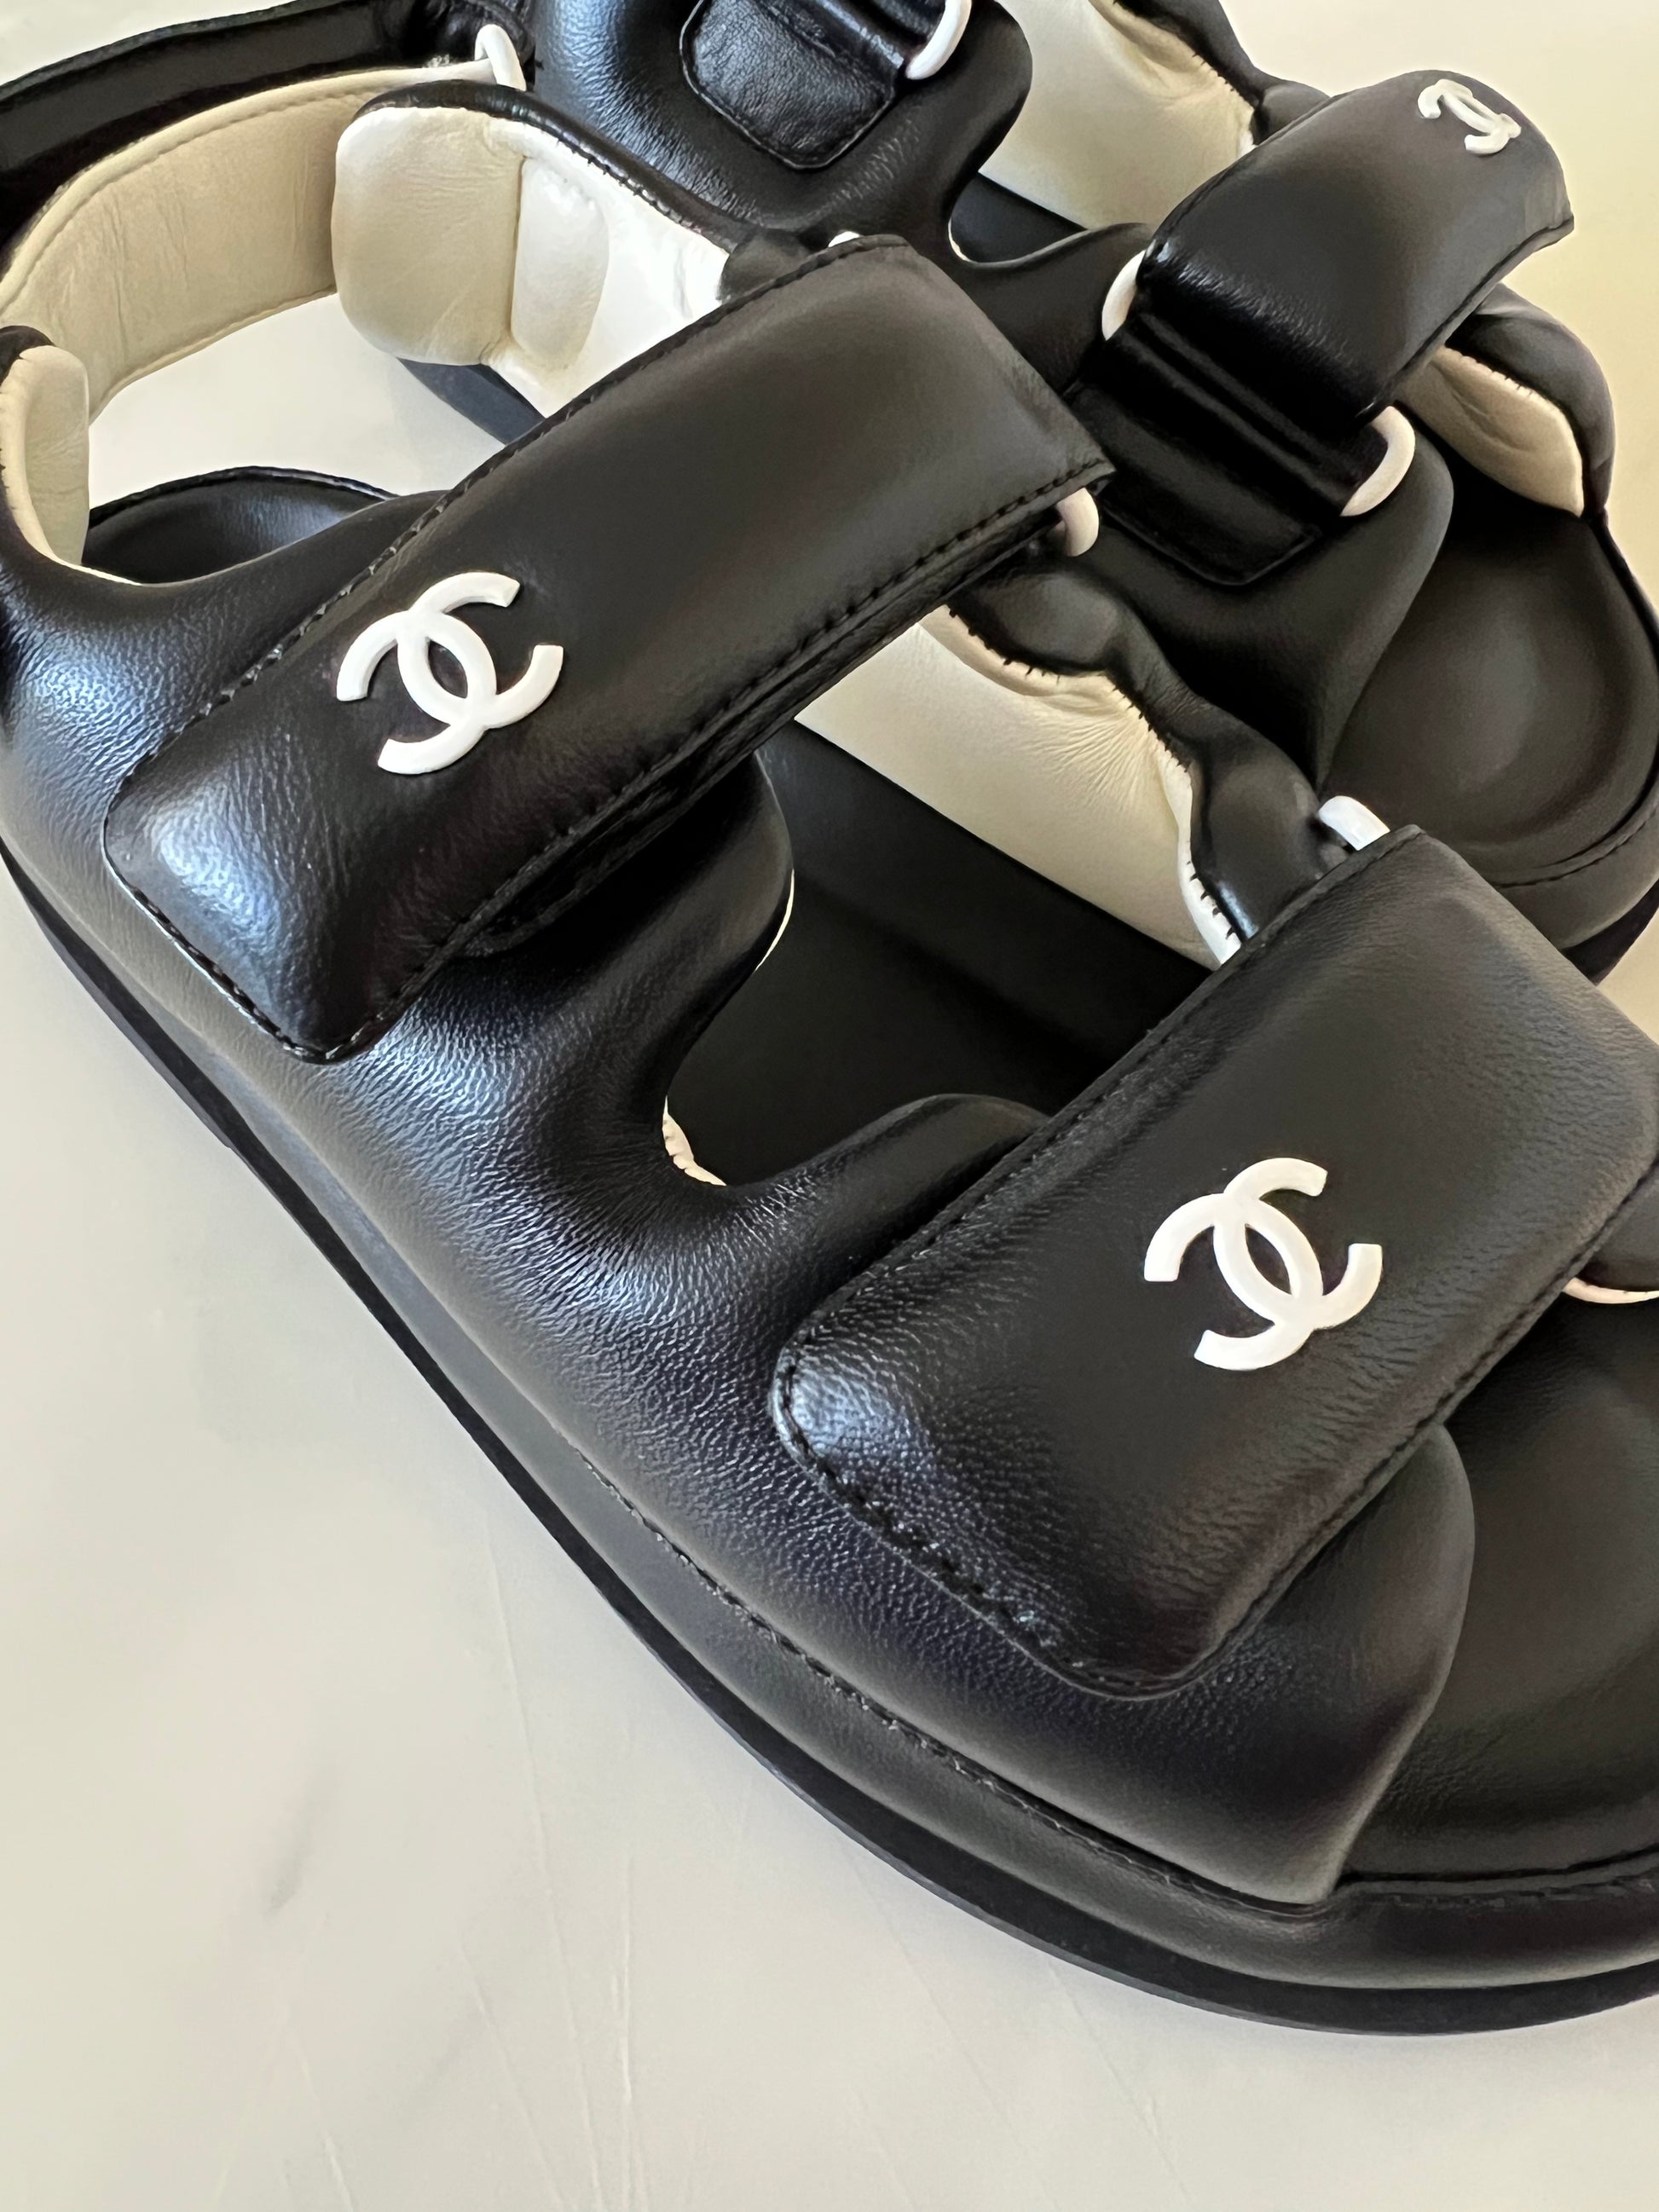 Chanel Chanel White Camellia Black Jelly Sandals Made in Italy